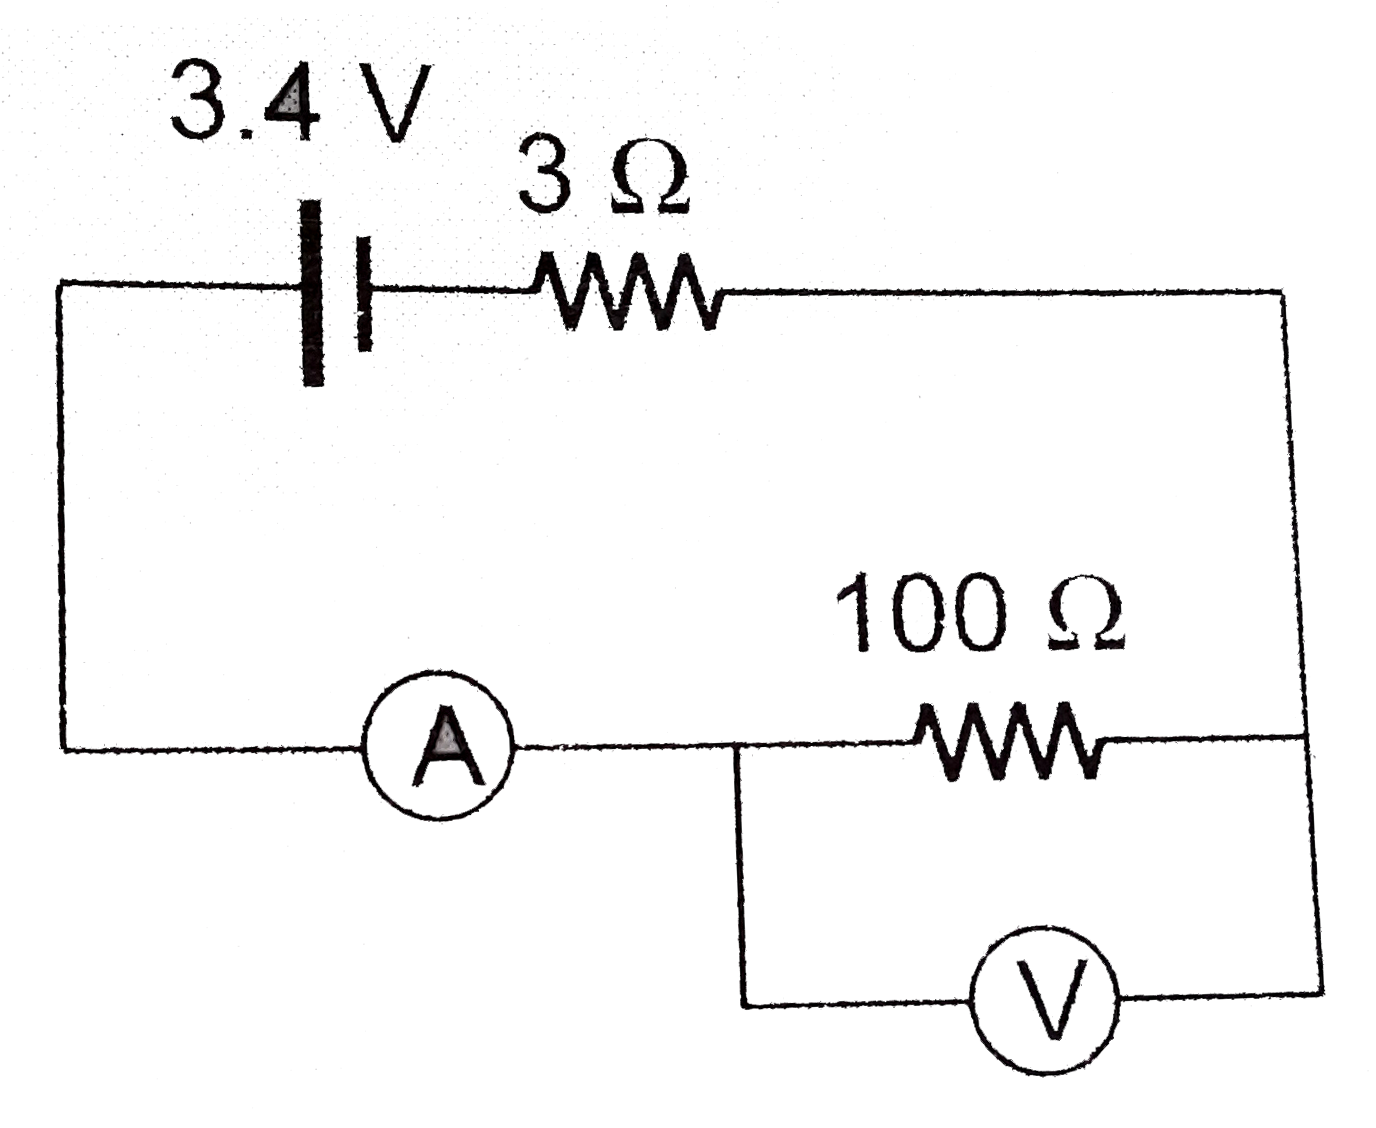 (a) A cell of emf 3.4 V and internal resistance 3 Omega is connected to an ammeter having resistance 2 Omega and to an external resistance 100 Omega. When a voltmeter is connected across the 100 Omega resistance the ammeter reading is 0.04 A. Find the voltage read by the voltmeter and its resistance. Had the voltmeter been an ideal one, what would have its reading ?      (b) Two resistances of 100 Omega and 200 Omega are connected in series with battery of emf 4 V and negligible internal resistance. A voltmeter of resistance 200 Omega is used to measure voltemeter of resistances separately. Calculate the voltmeter indicated.   ( c) In the circuit shown, a voltmeter reads 30 V when it is connected across the 400 Omega resistance. Calculate what the same voltmeter will read when it is connected across the 300 Omega resistance ?      (d) An ammeter and a voltmeter are connected in series to a battery of emf E = 6.0 V. When a certain resistance is connected in parallel with the voltmeter. the reading of the ammeter is doubled. while voltmeter reading is reduced to half. Find the voltmeter reading after the connection of the resistance.